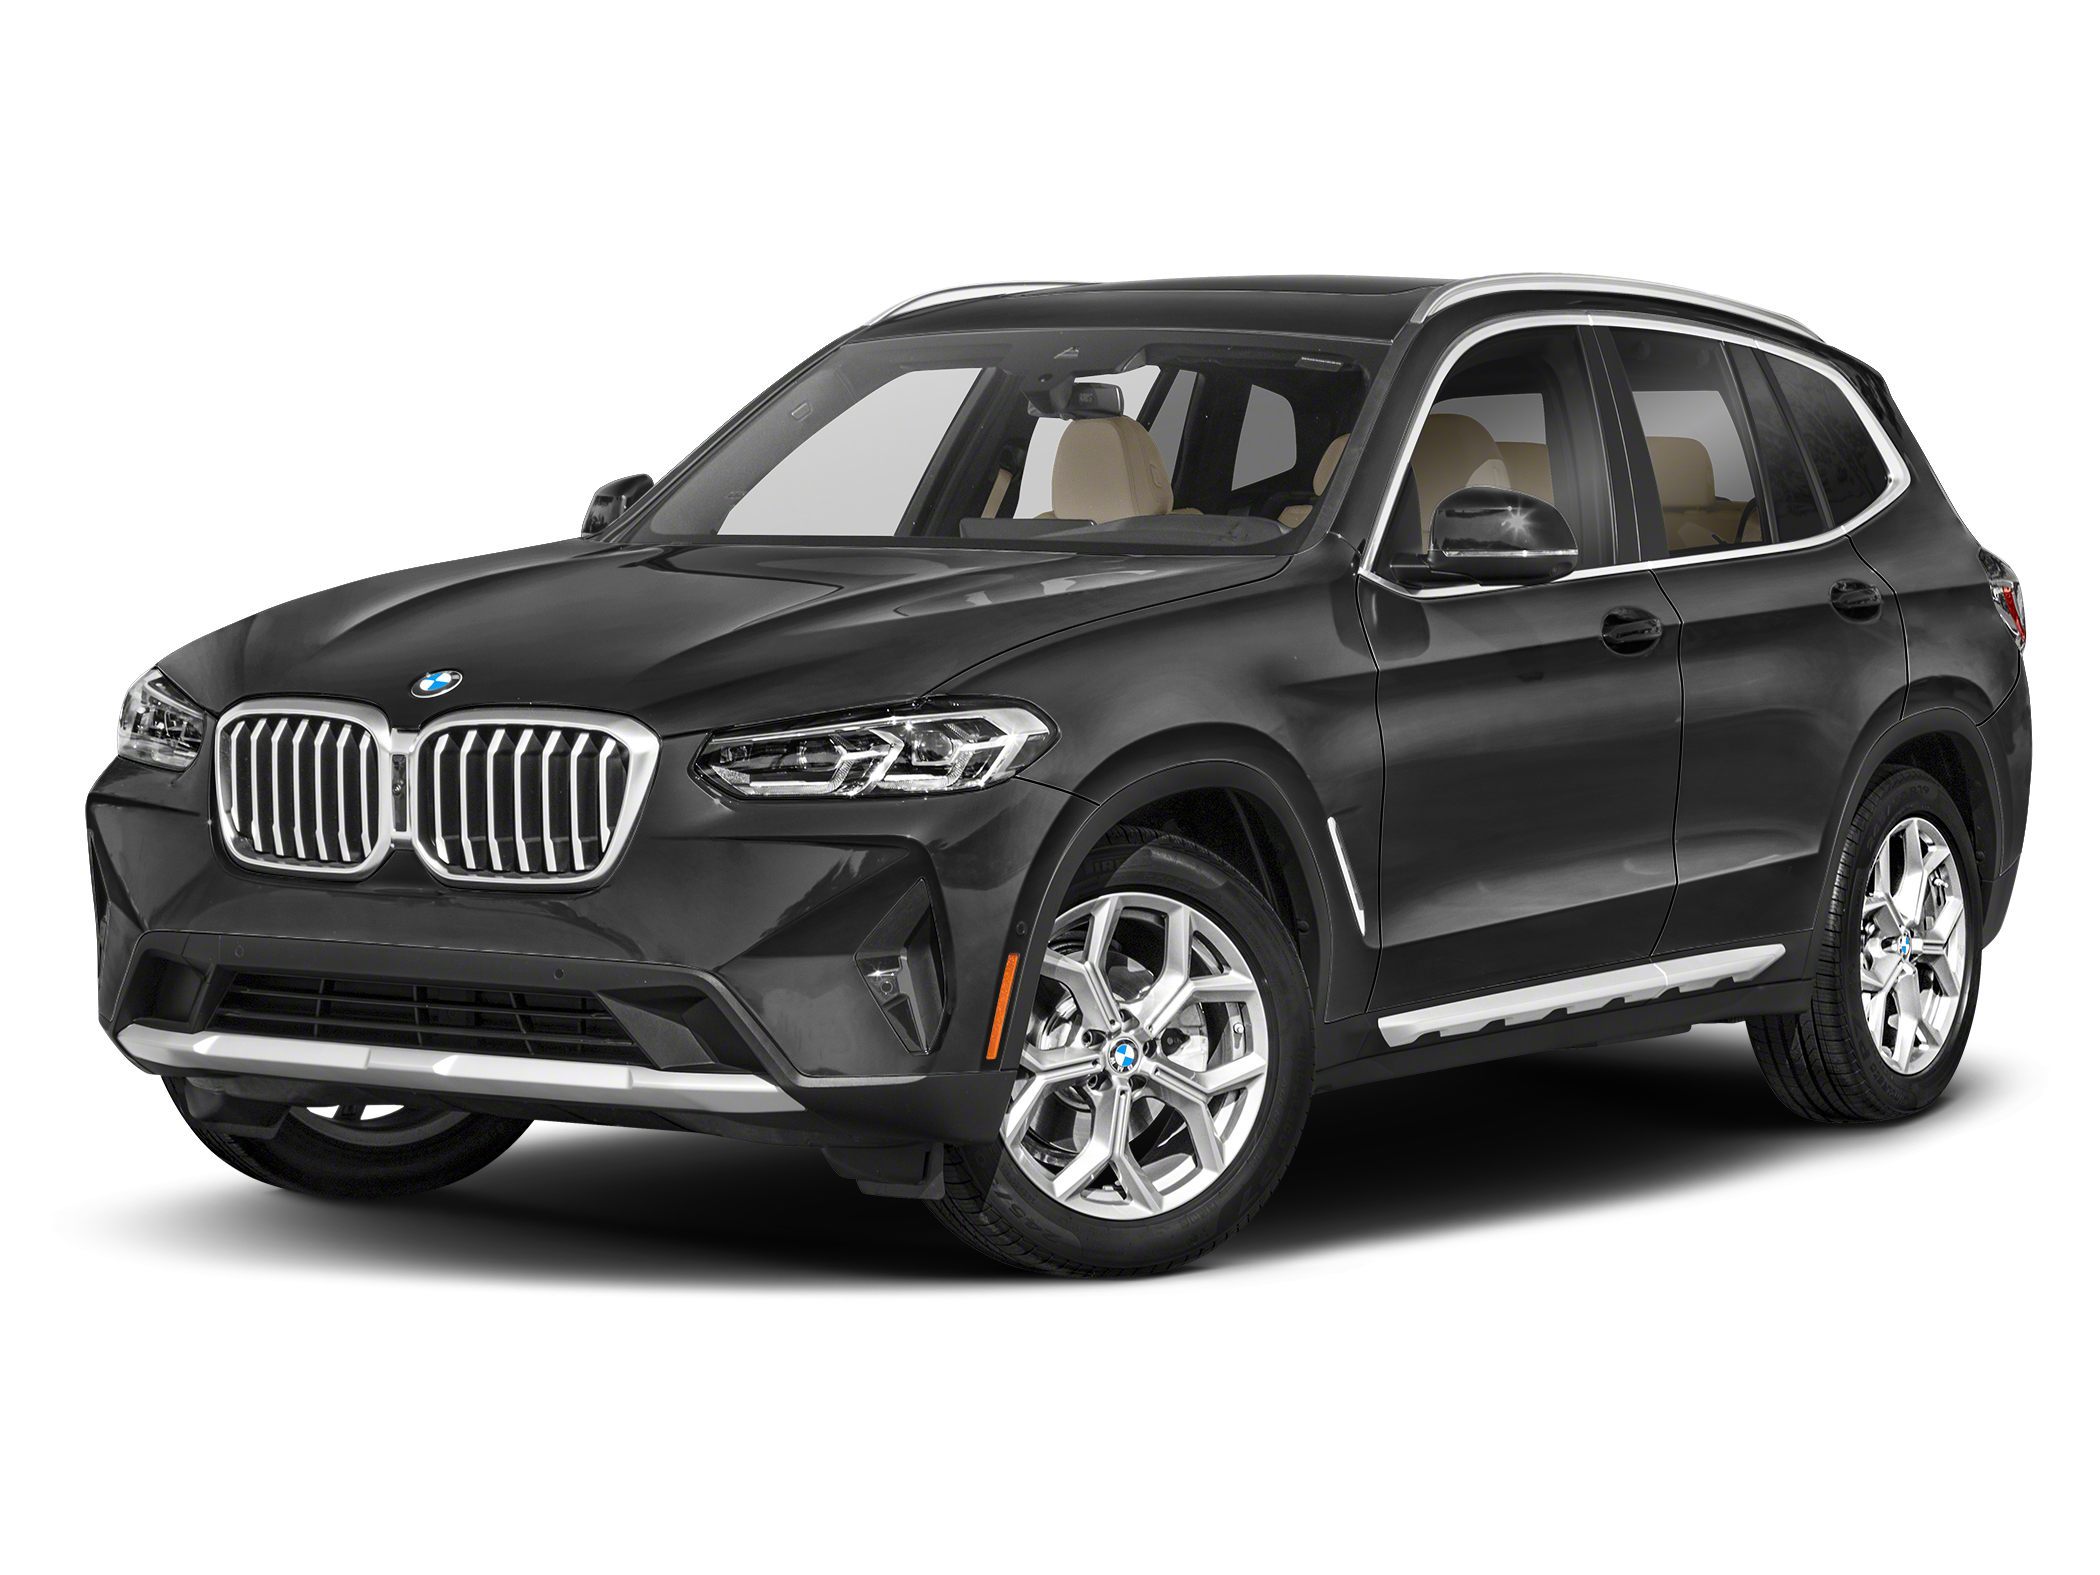 BMW X3 (F25) – value for money?